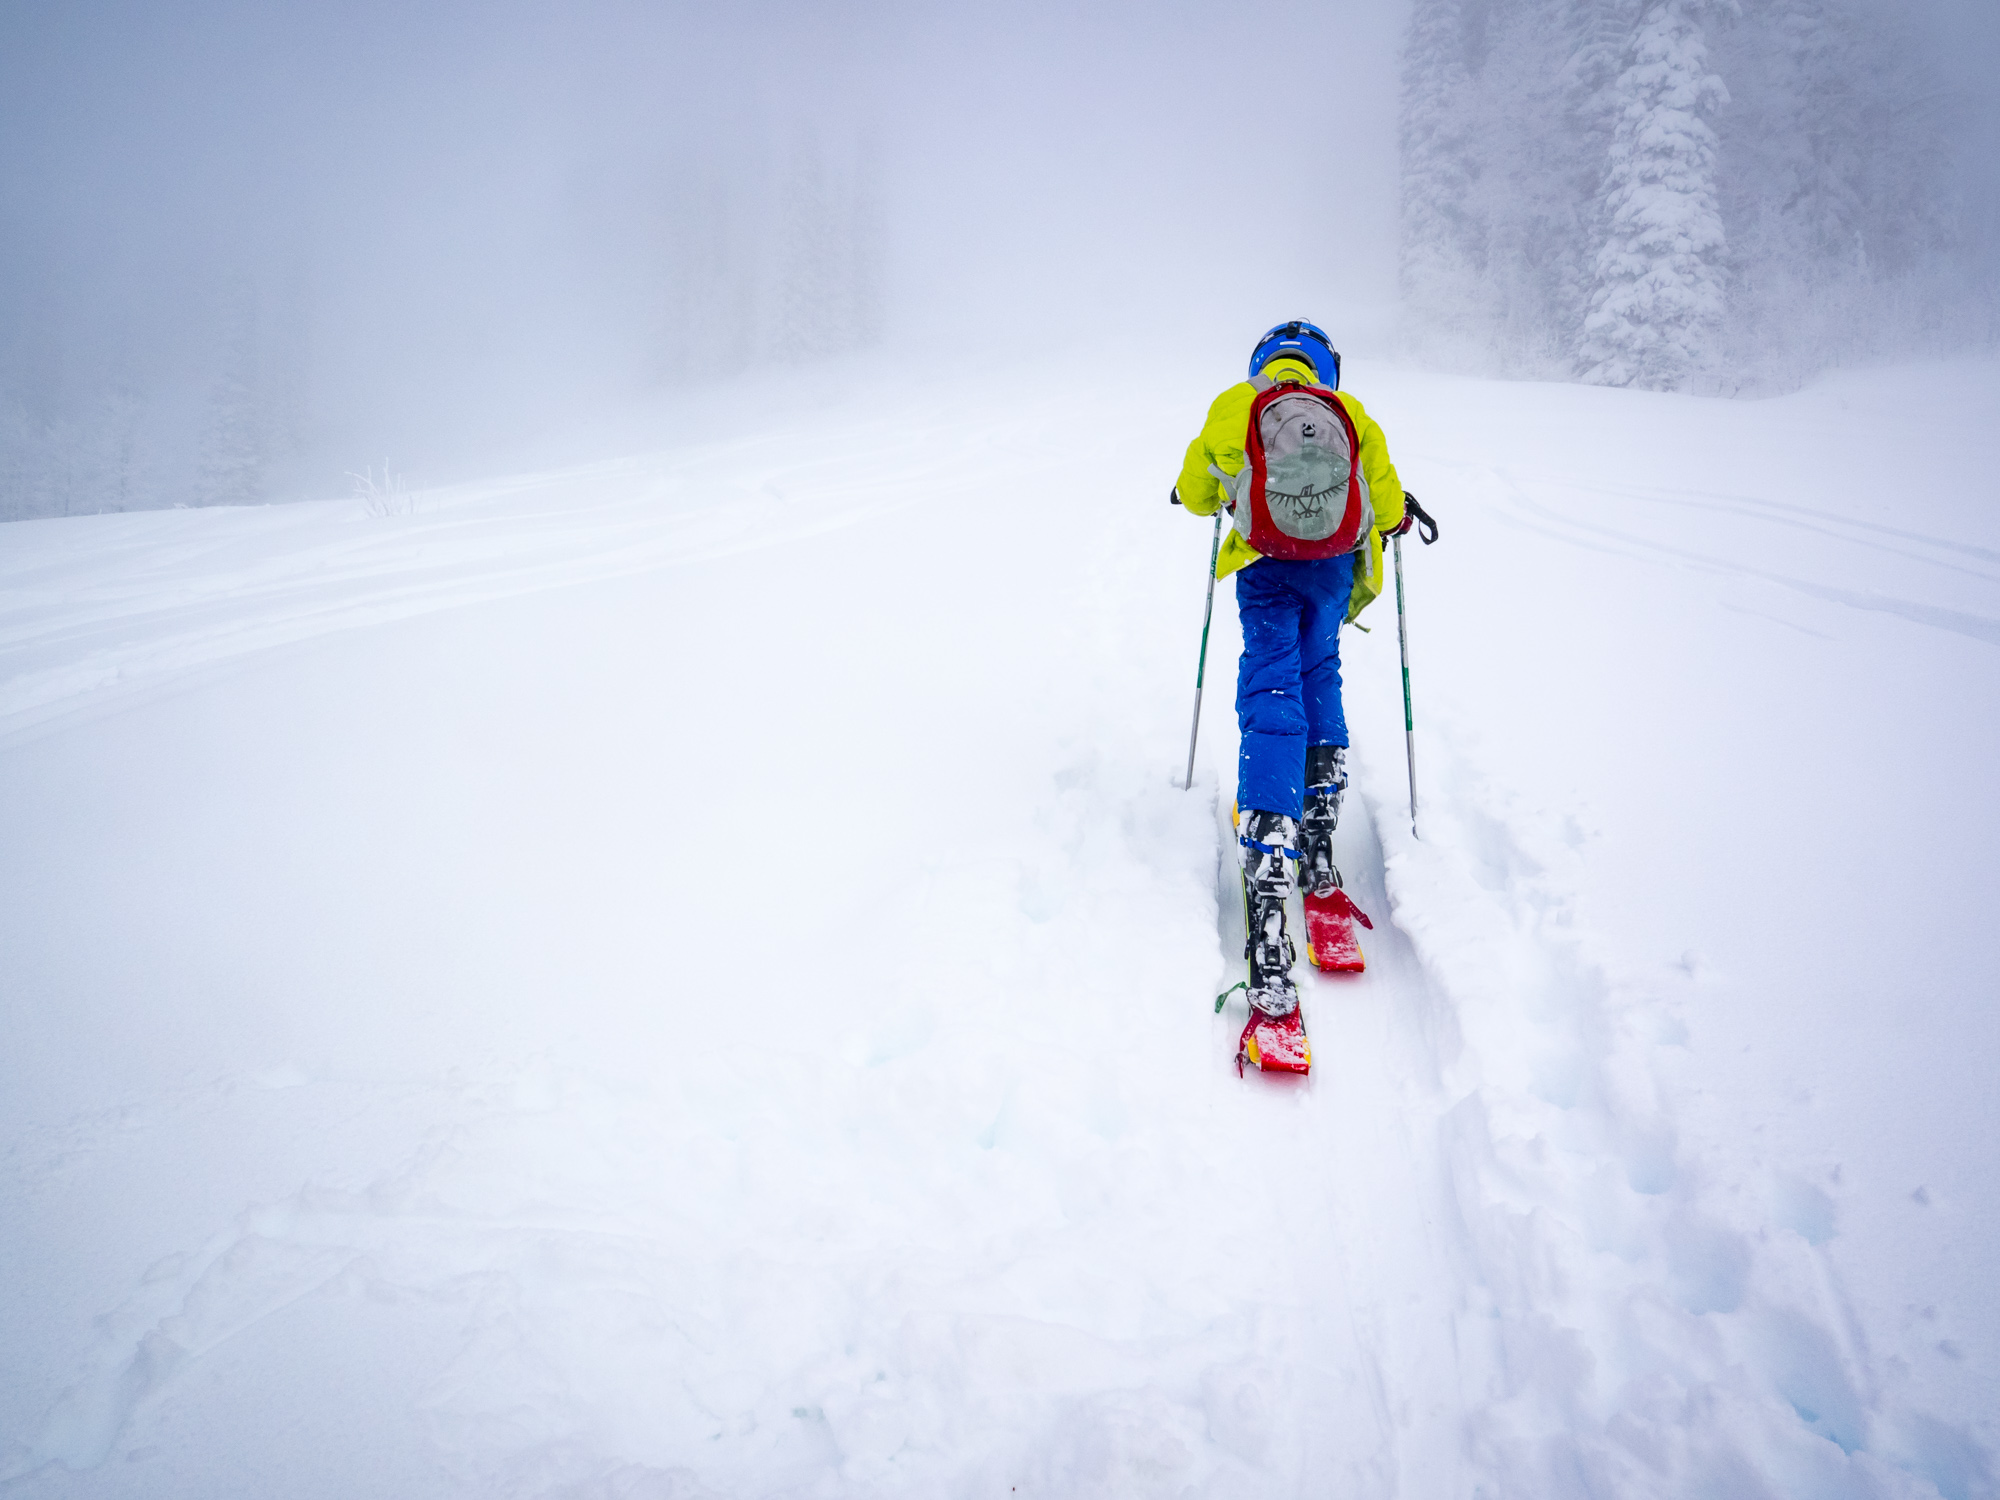 Young boy hiking for turns in fresh powder pre season at Brundage Mountain Resort in McCall, Idaho.